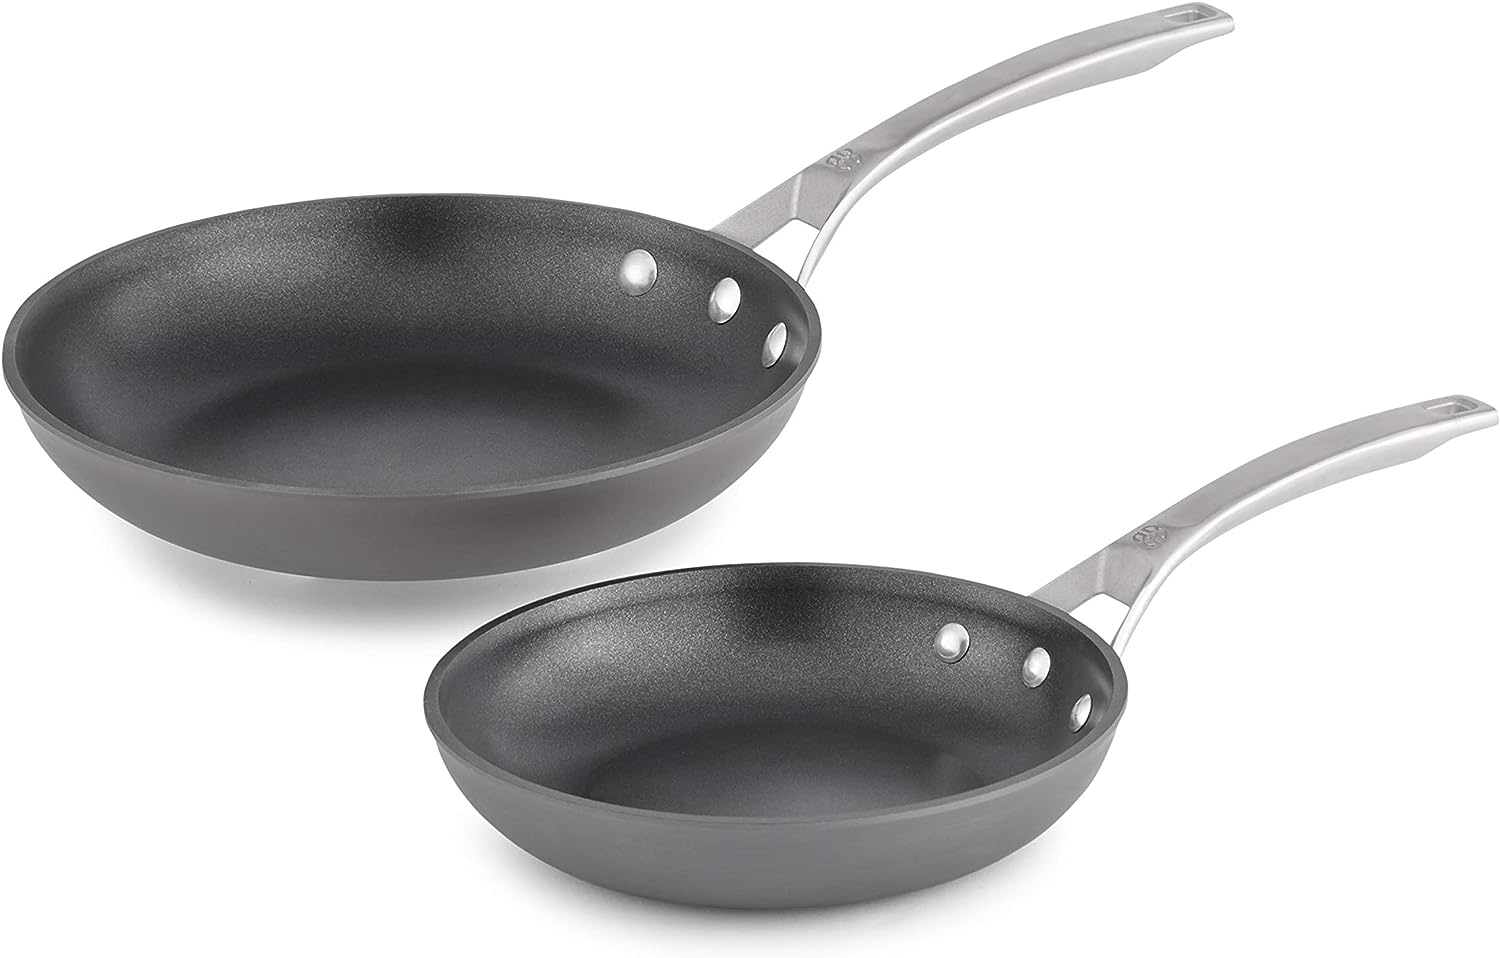 https://bigbigmart.com/wp-content/uploads/2023/09/Calphalon-Nonstick-Frying-Pan-Set-with-Stay-Cool-Handles-Dishwasher-and-Metal-Utensil-Safe-PFOA-Free-8-and-10-Inch-Black.jpg